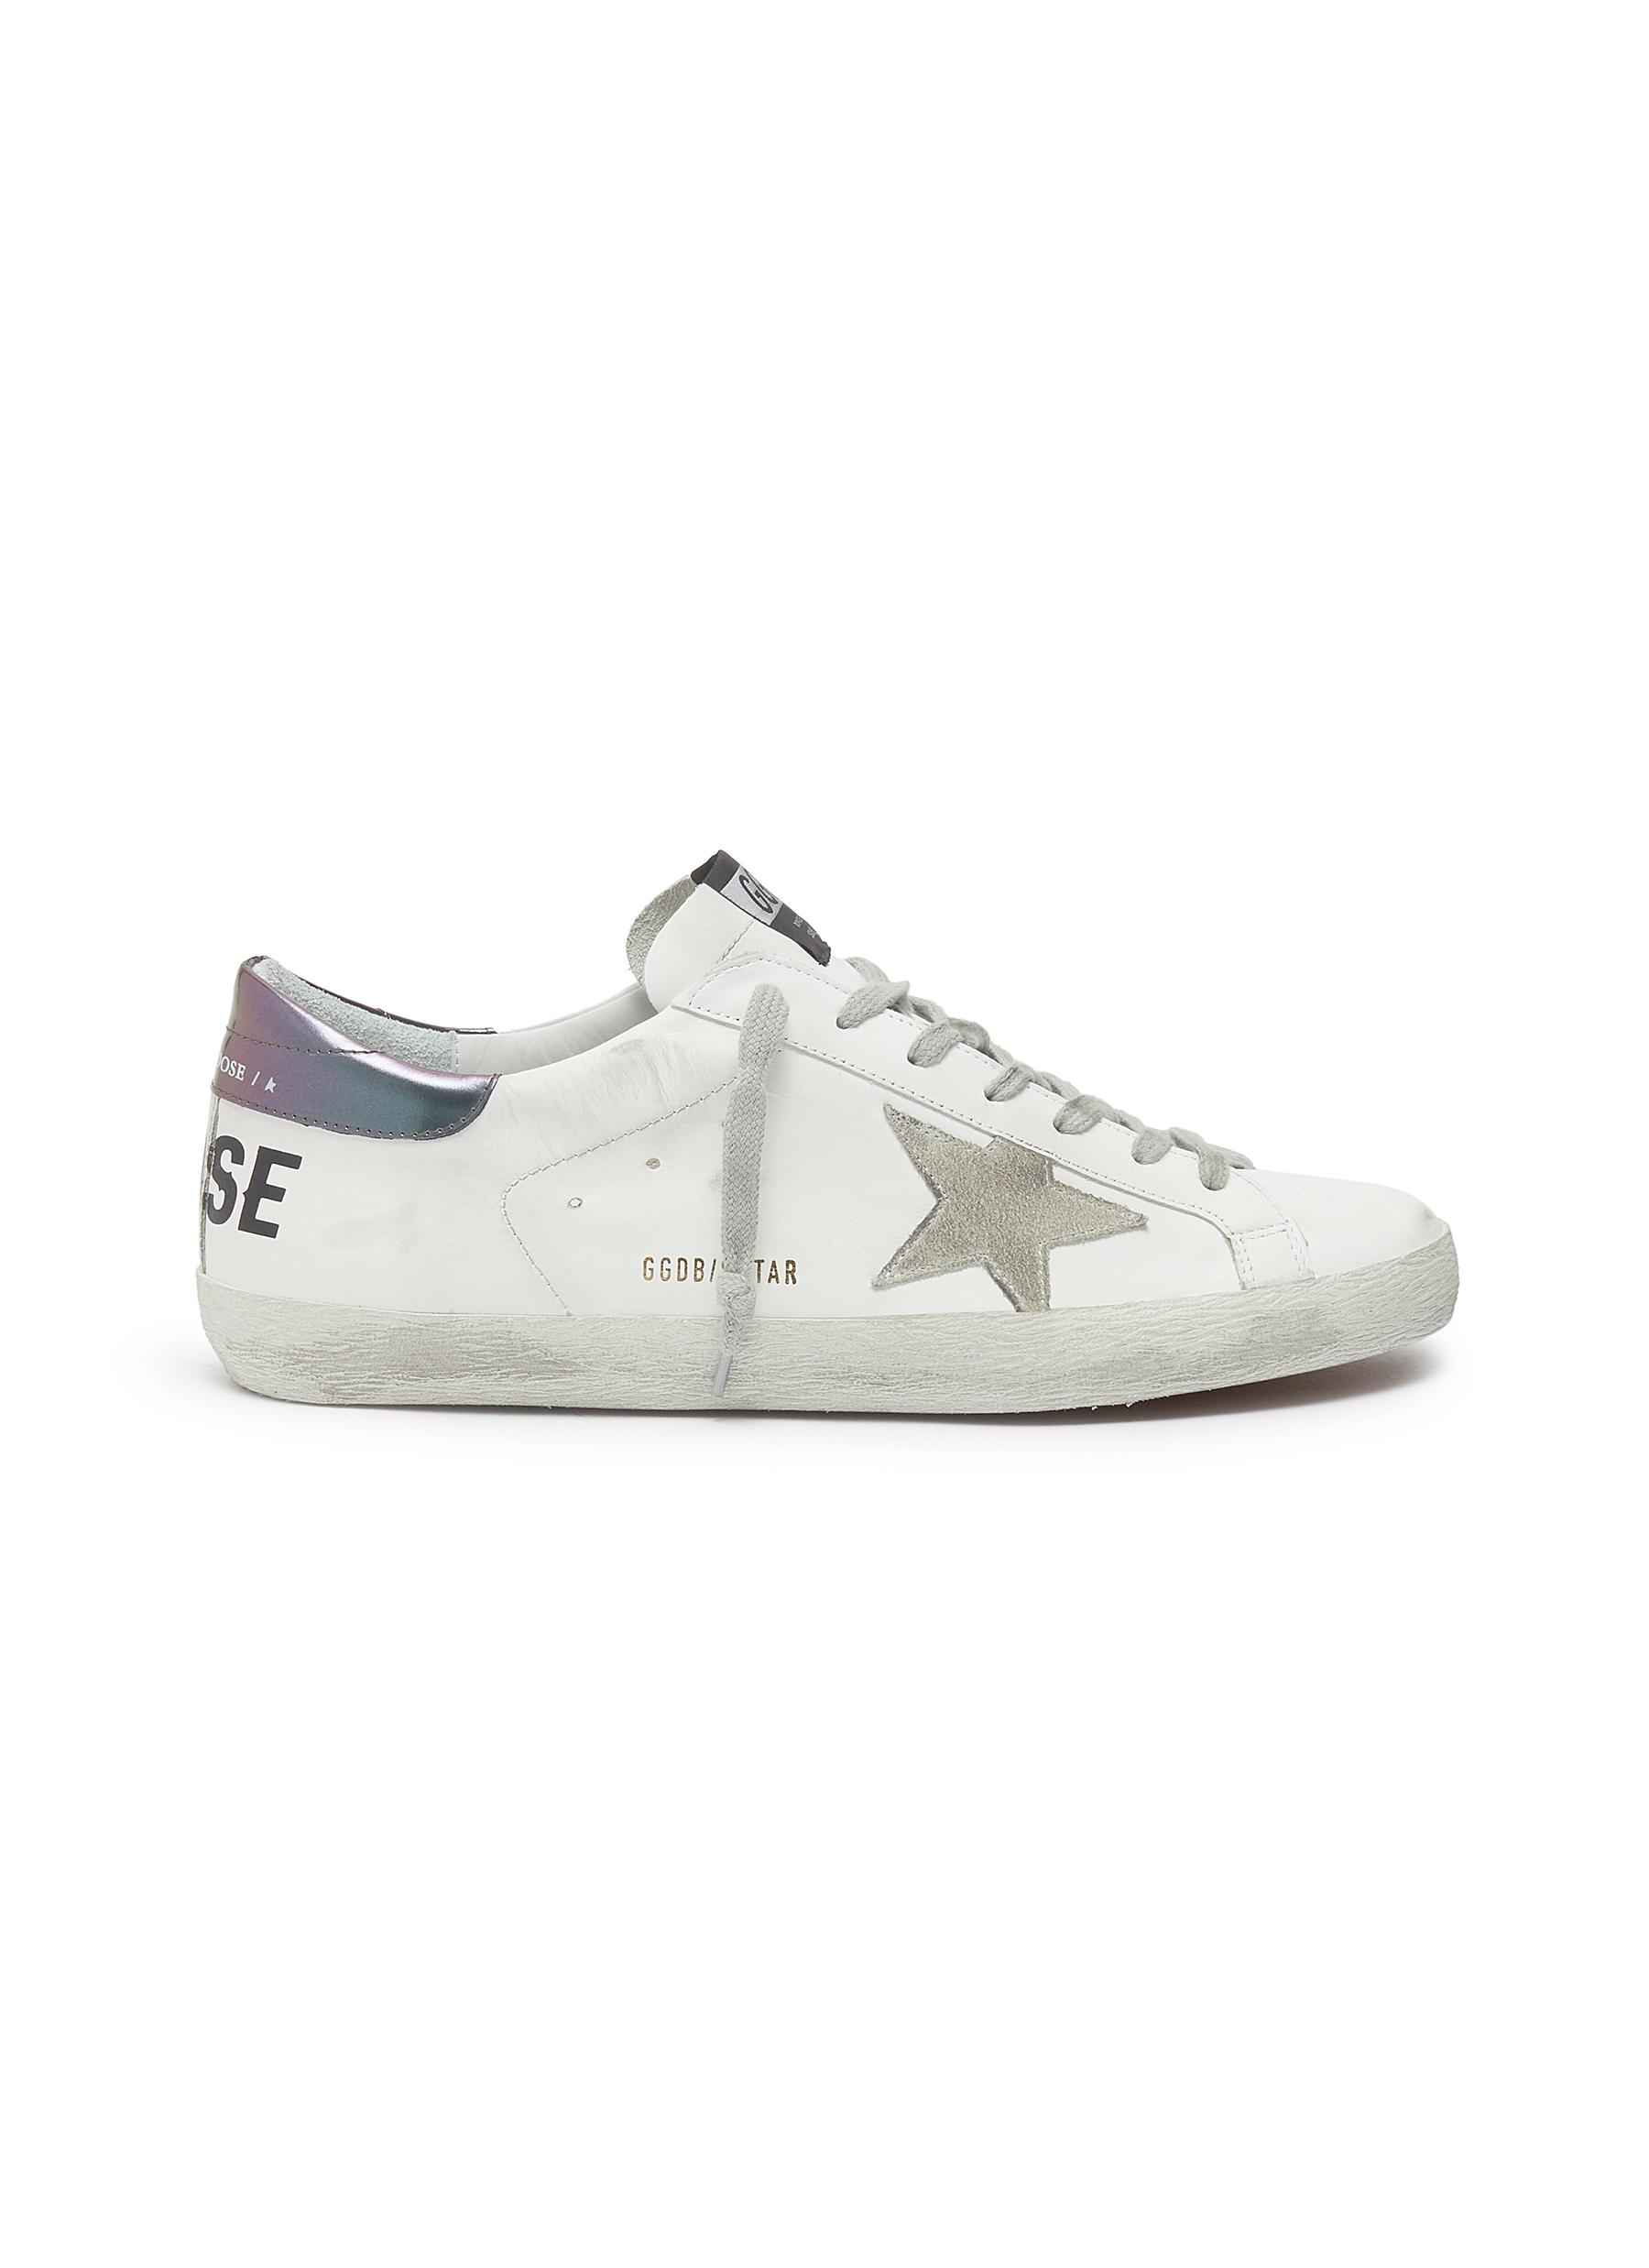 'Superstar' iridescent tab leather sneakers